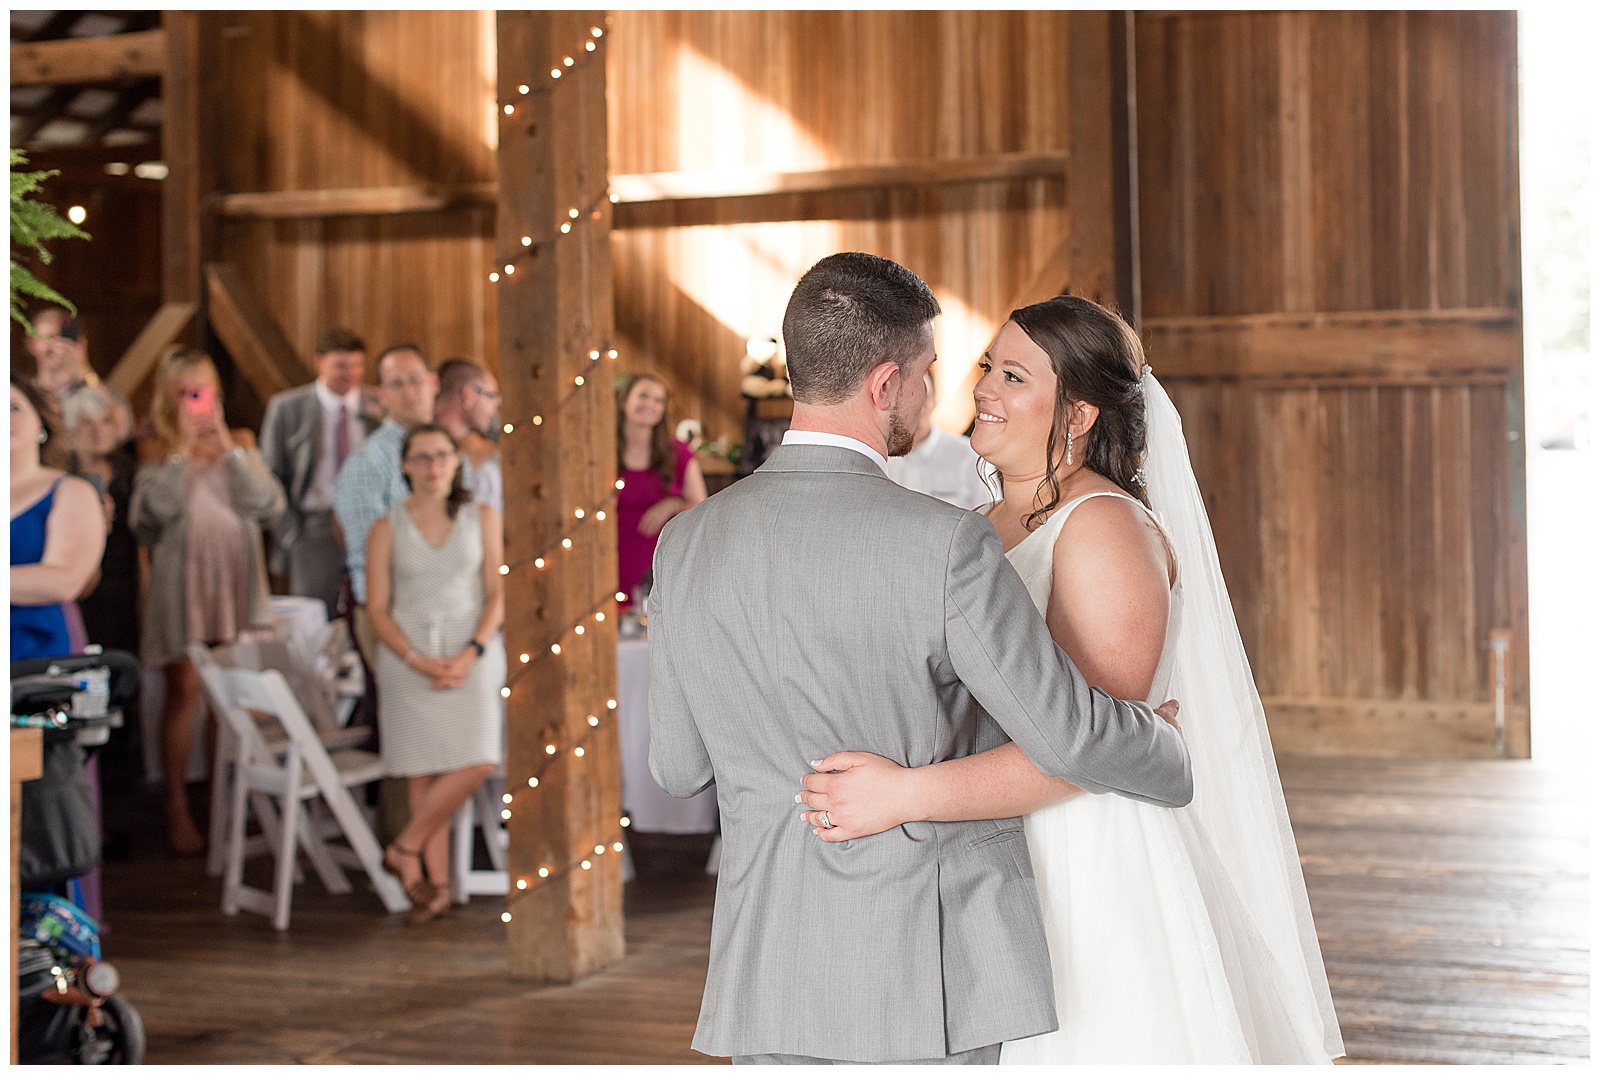 bride smiling at her groom as they do their first dance and his back is to the camera in barn venue at lakefield weddings